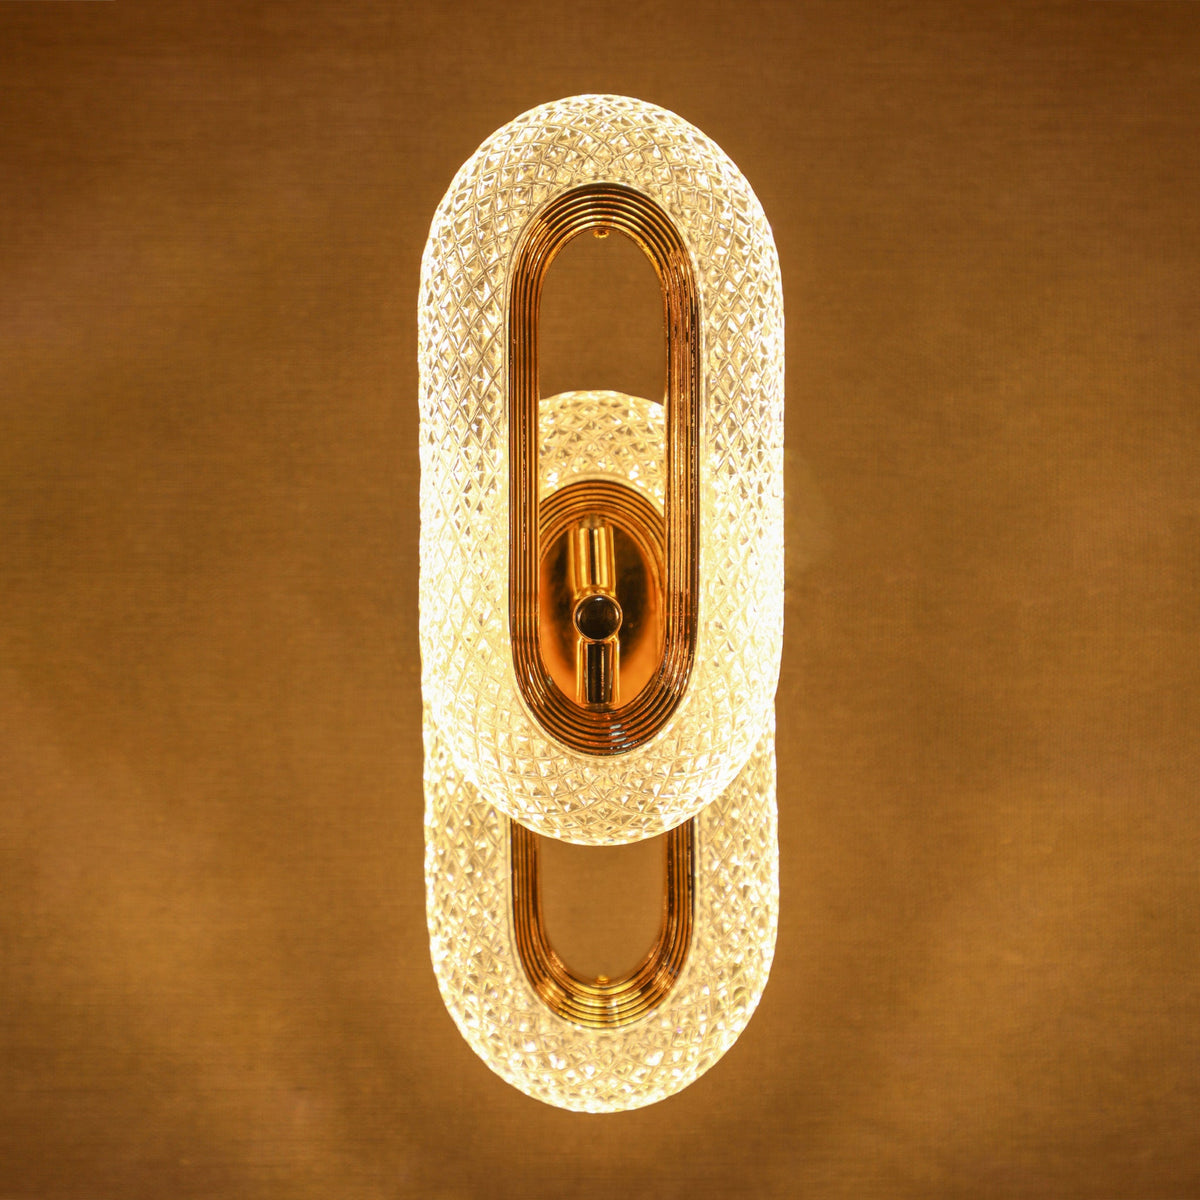 Buy Stay Grounded Double LED Wall Light online